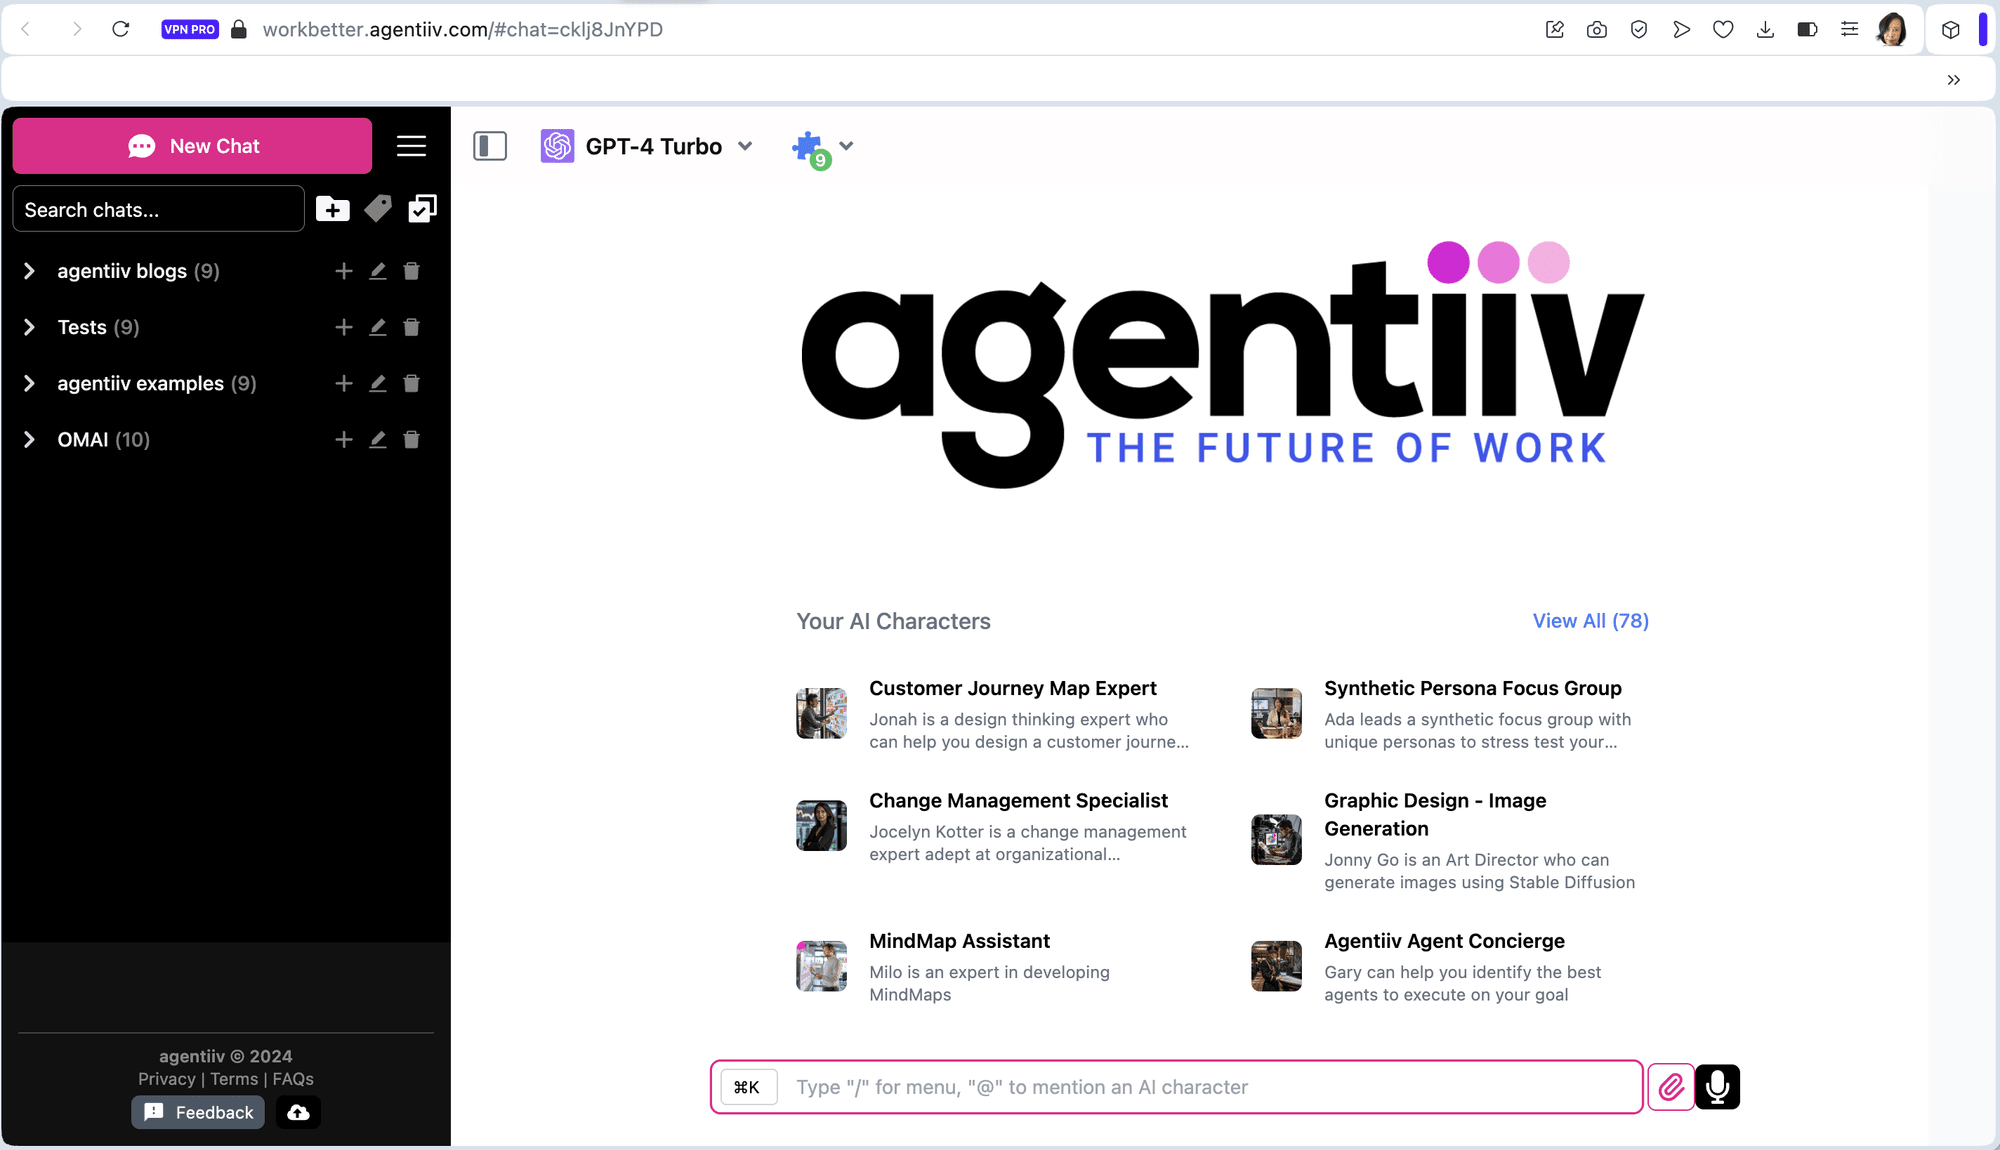 Screenshot of the Agentiiv AI platform, showing a chat interface on the left and a gallery of AI agents on the right. The Agentiiv logo is prominently displayed with the tagline "THE FUTURE OF WORK". The AI agents shown include a Customer Journey Map Expert, Synthetic Persona Focus Group, Change Management Specialist, Graphic Design - Image Generation, MindMap Assistant, and Agentiiv Agent Concierge, each with a brief description of their capabilities.